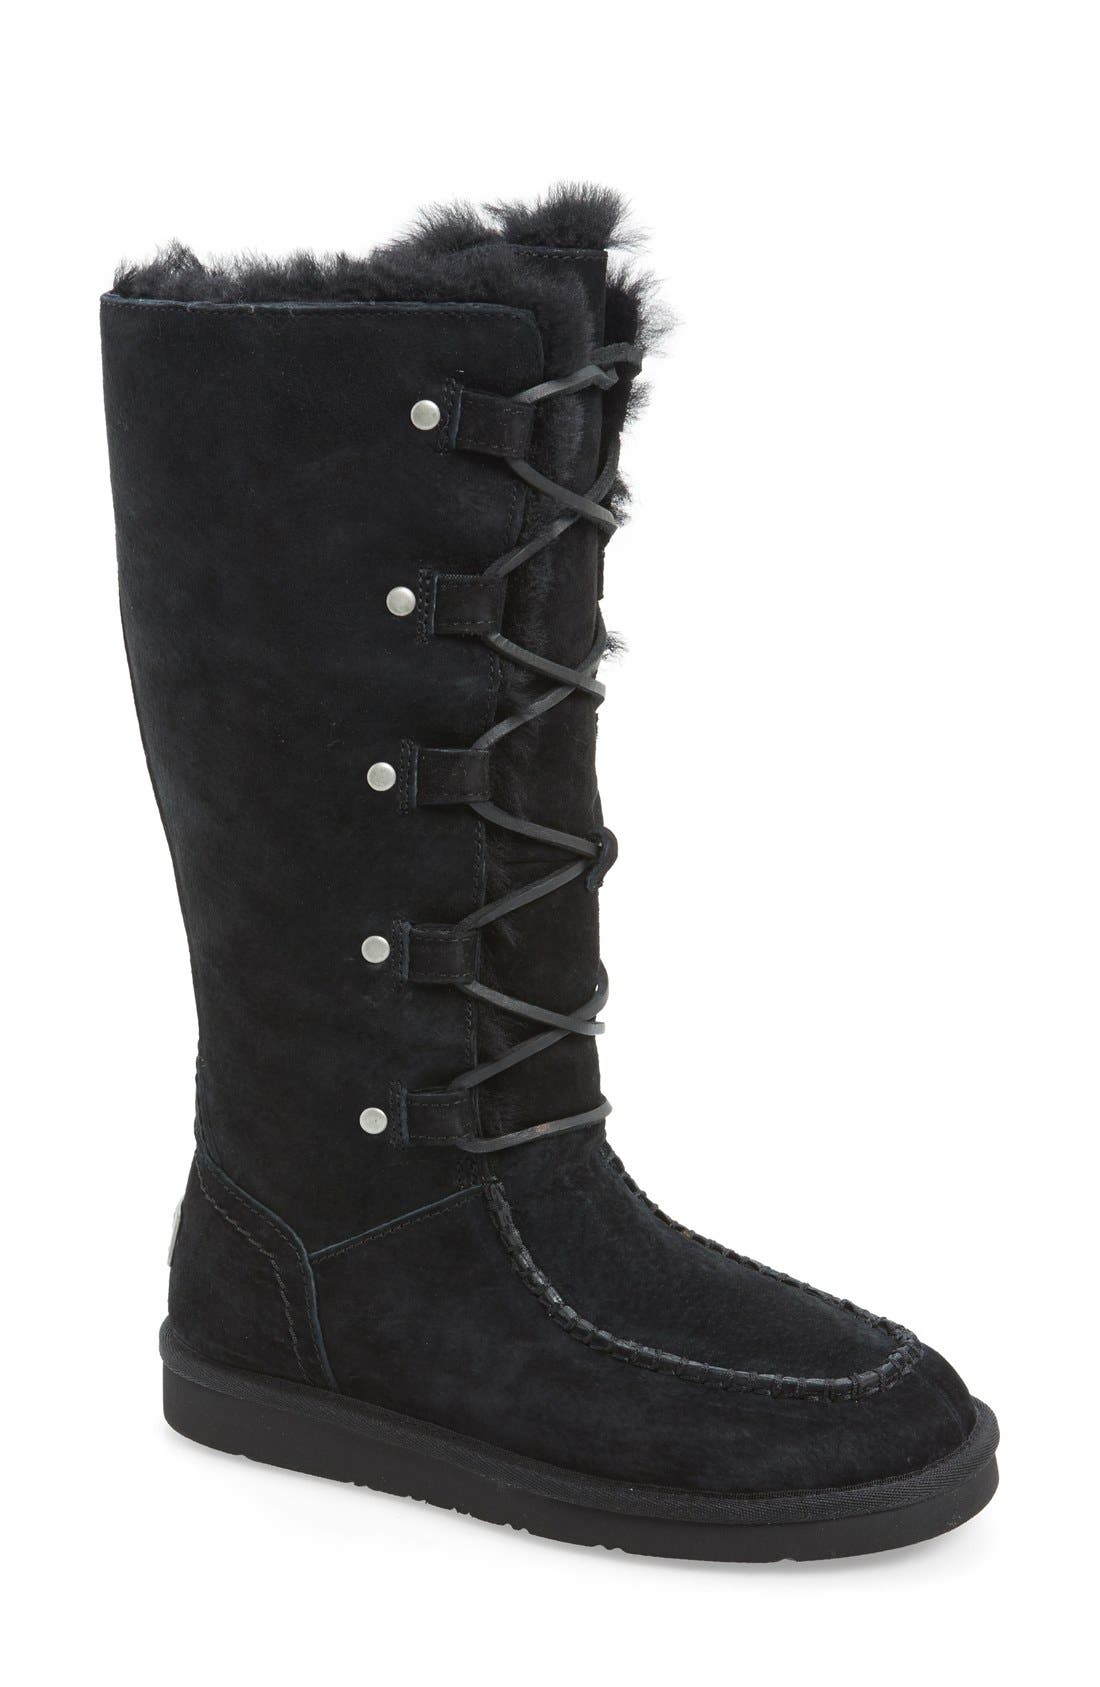 tall lace up uggs